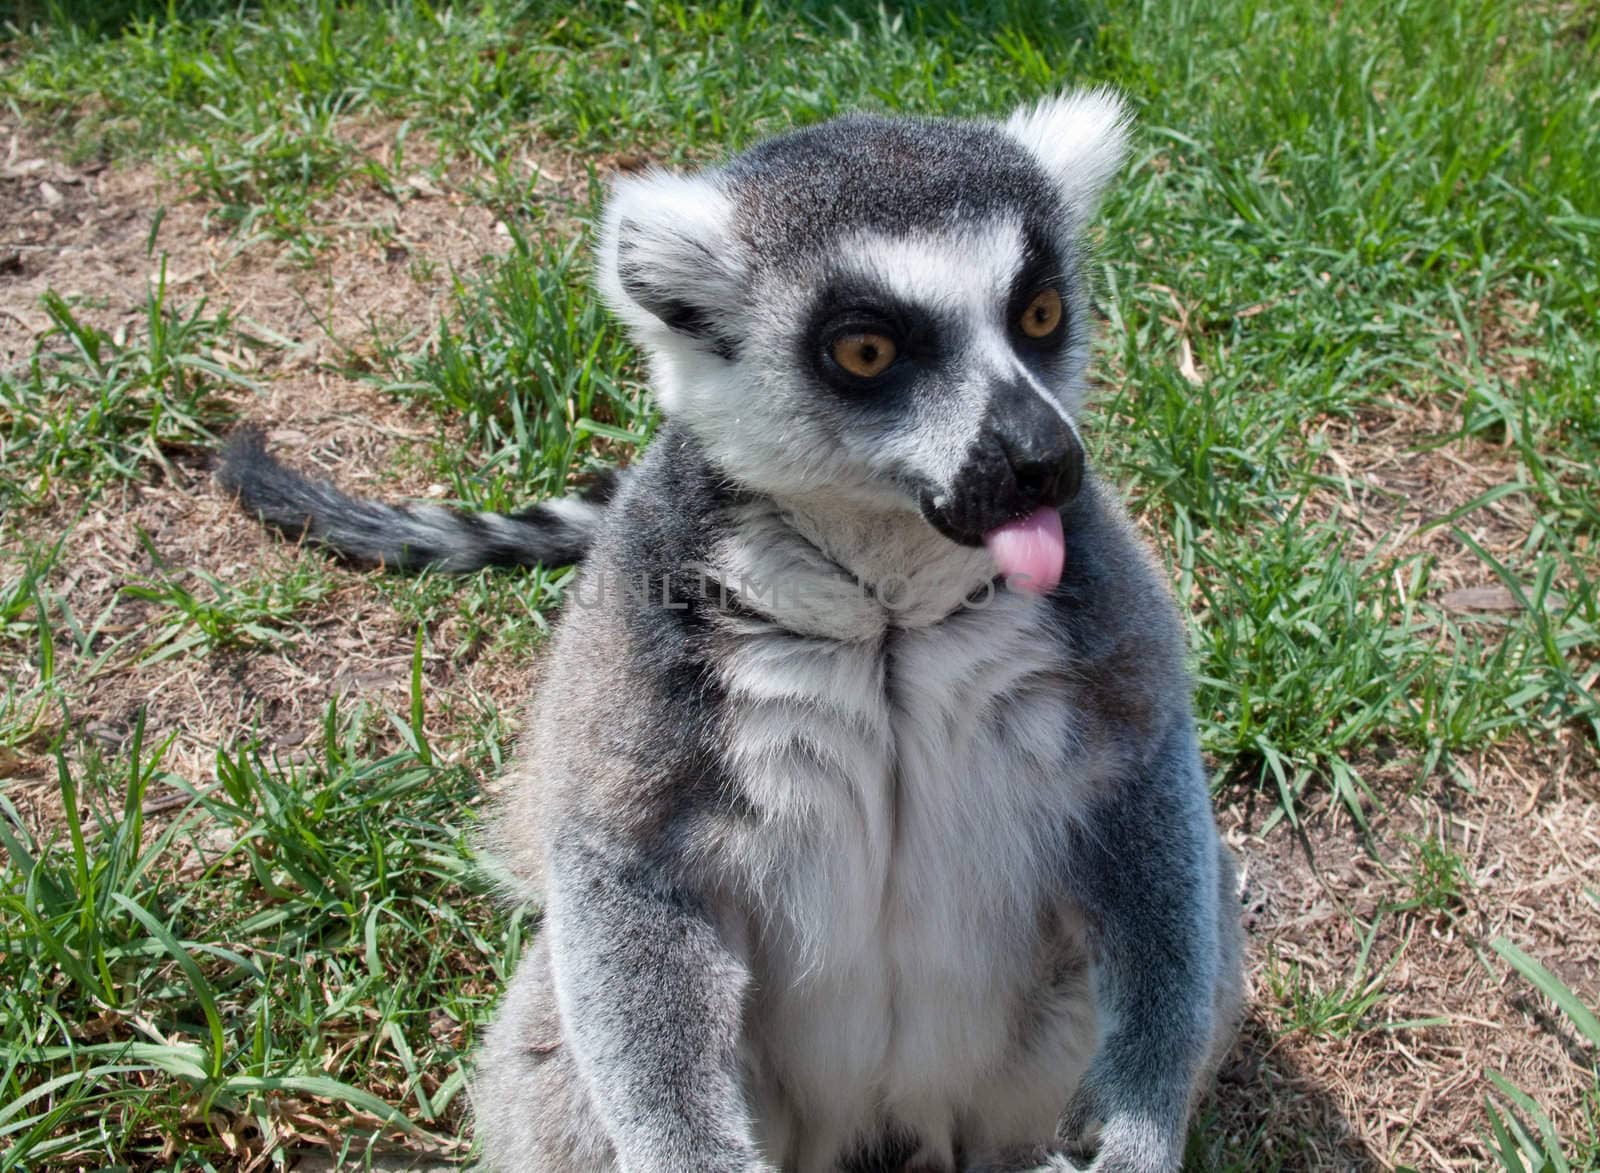 Lemur sticking its tongue out by steheap